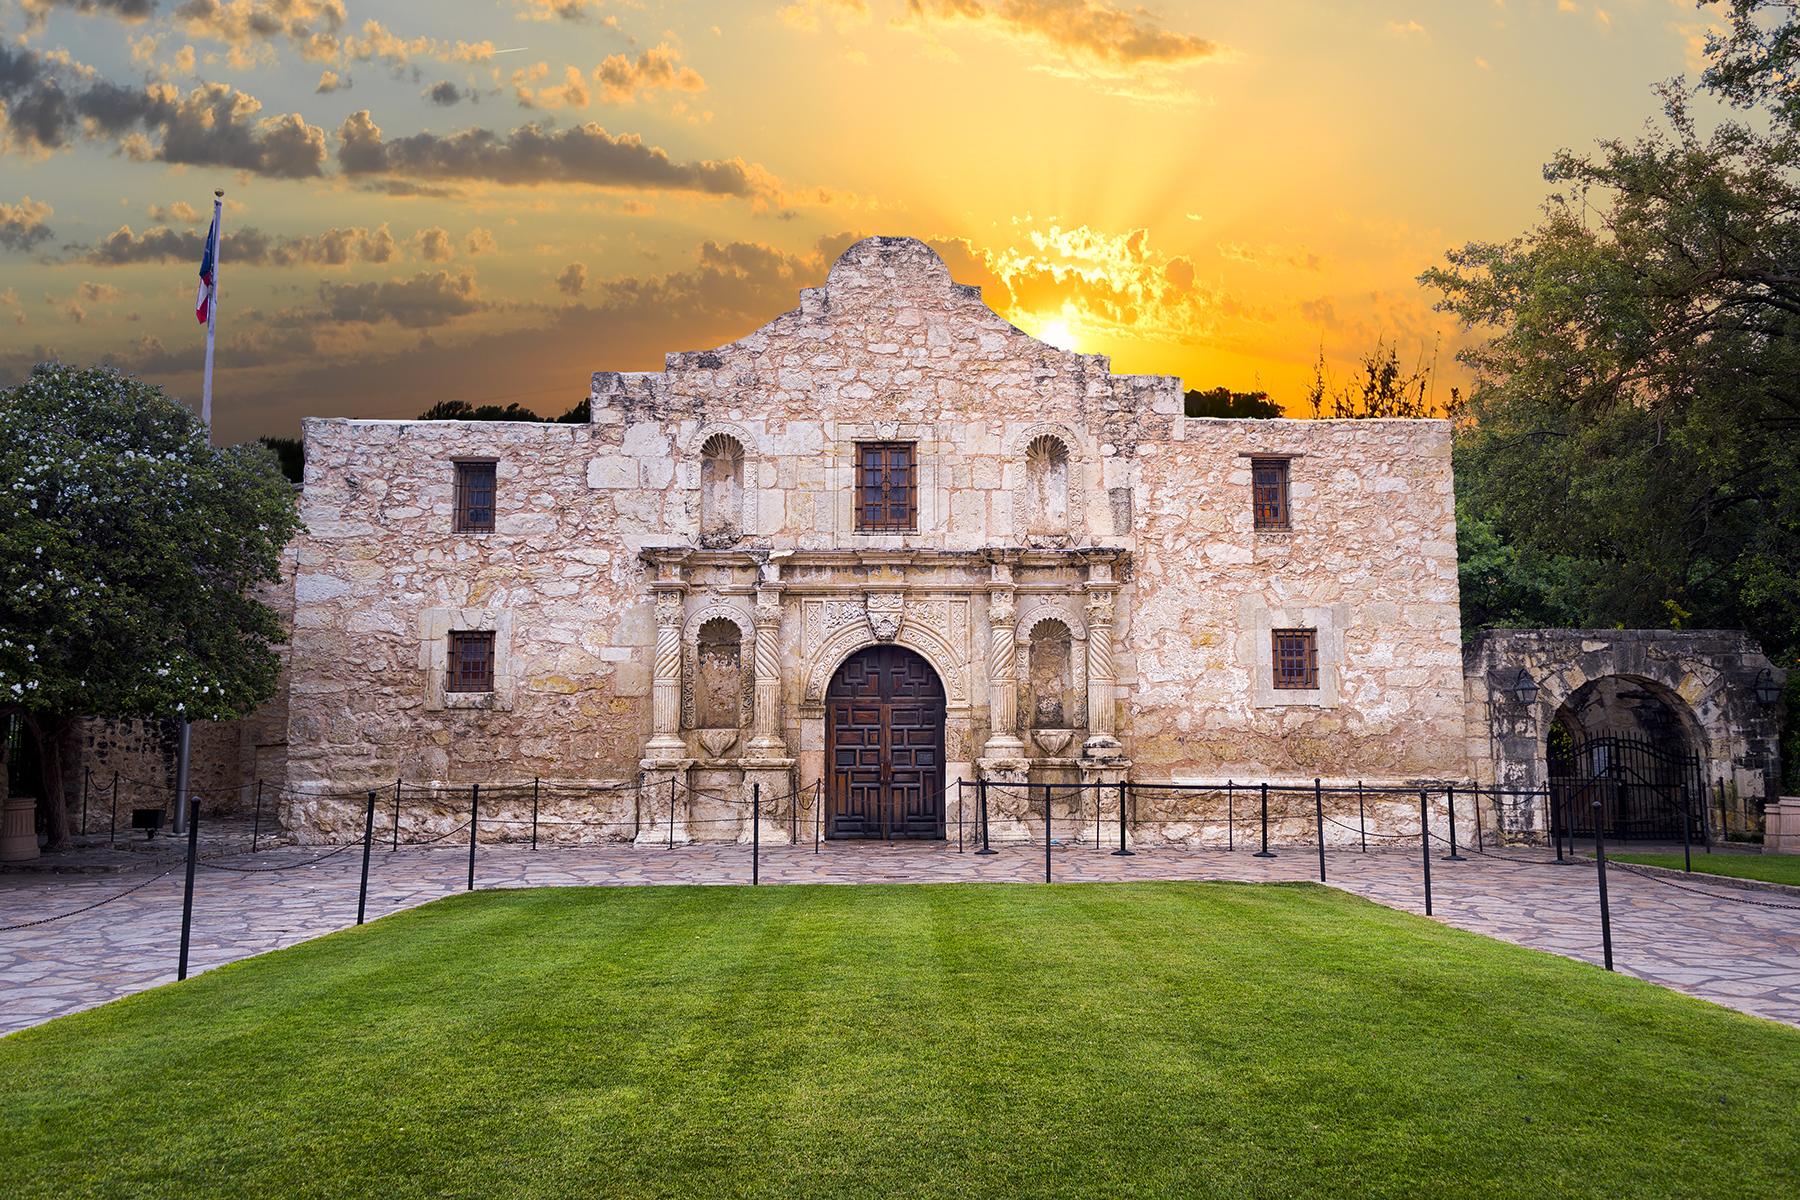 Things You Need To Know Before Visiting The Alamo Mission In San